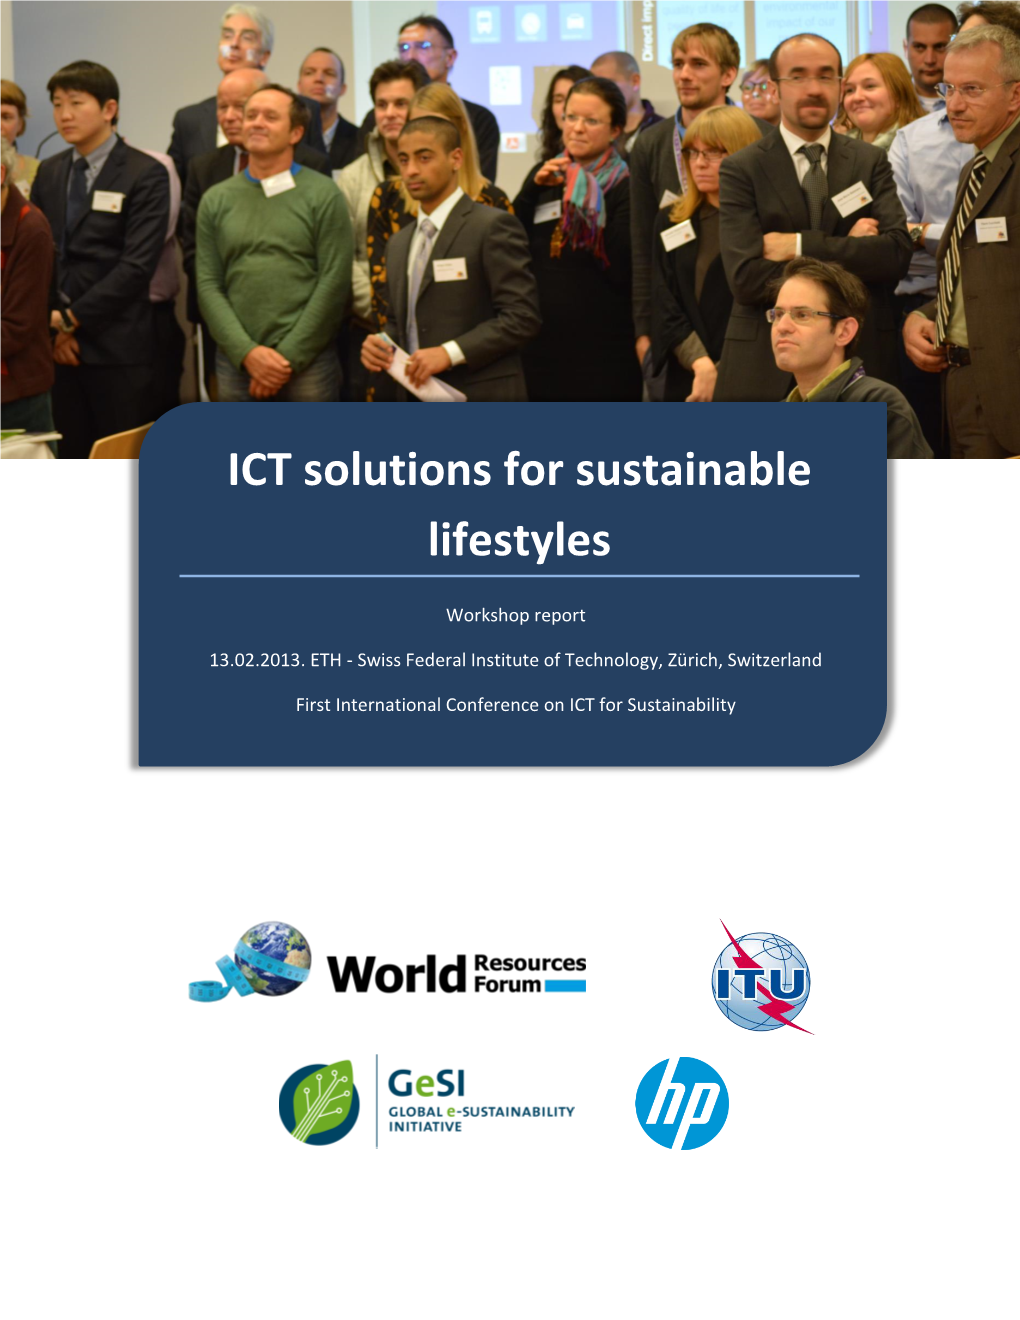 ICT Solutions for Sustainable Lifestyles